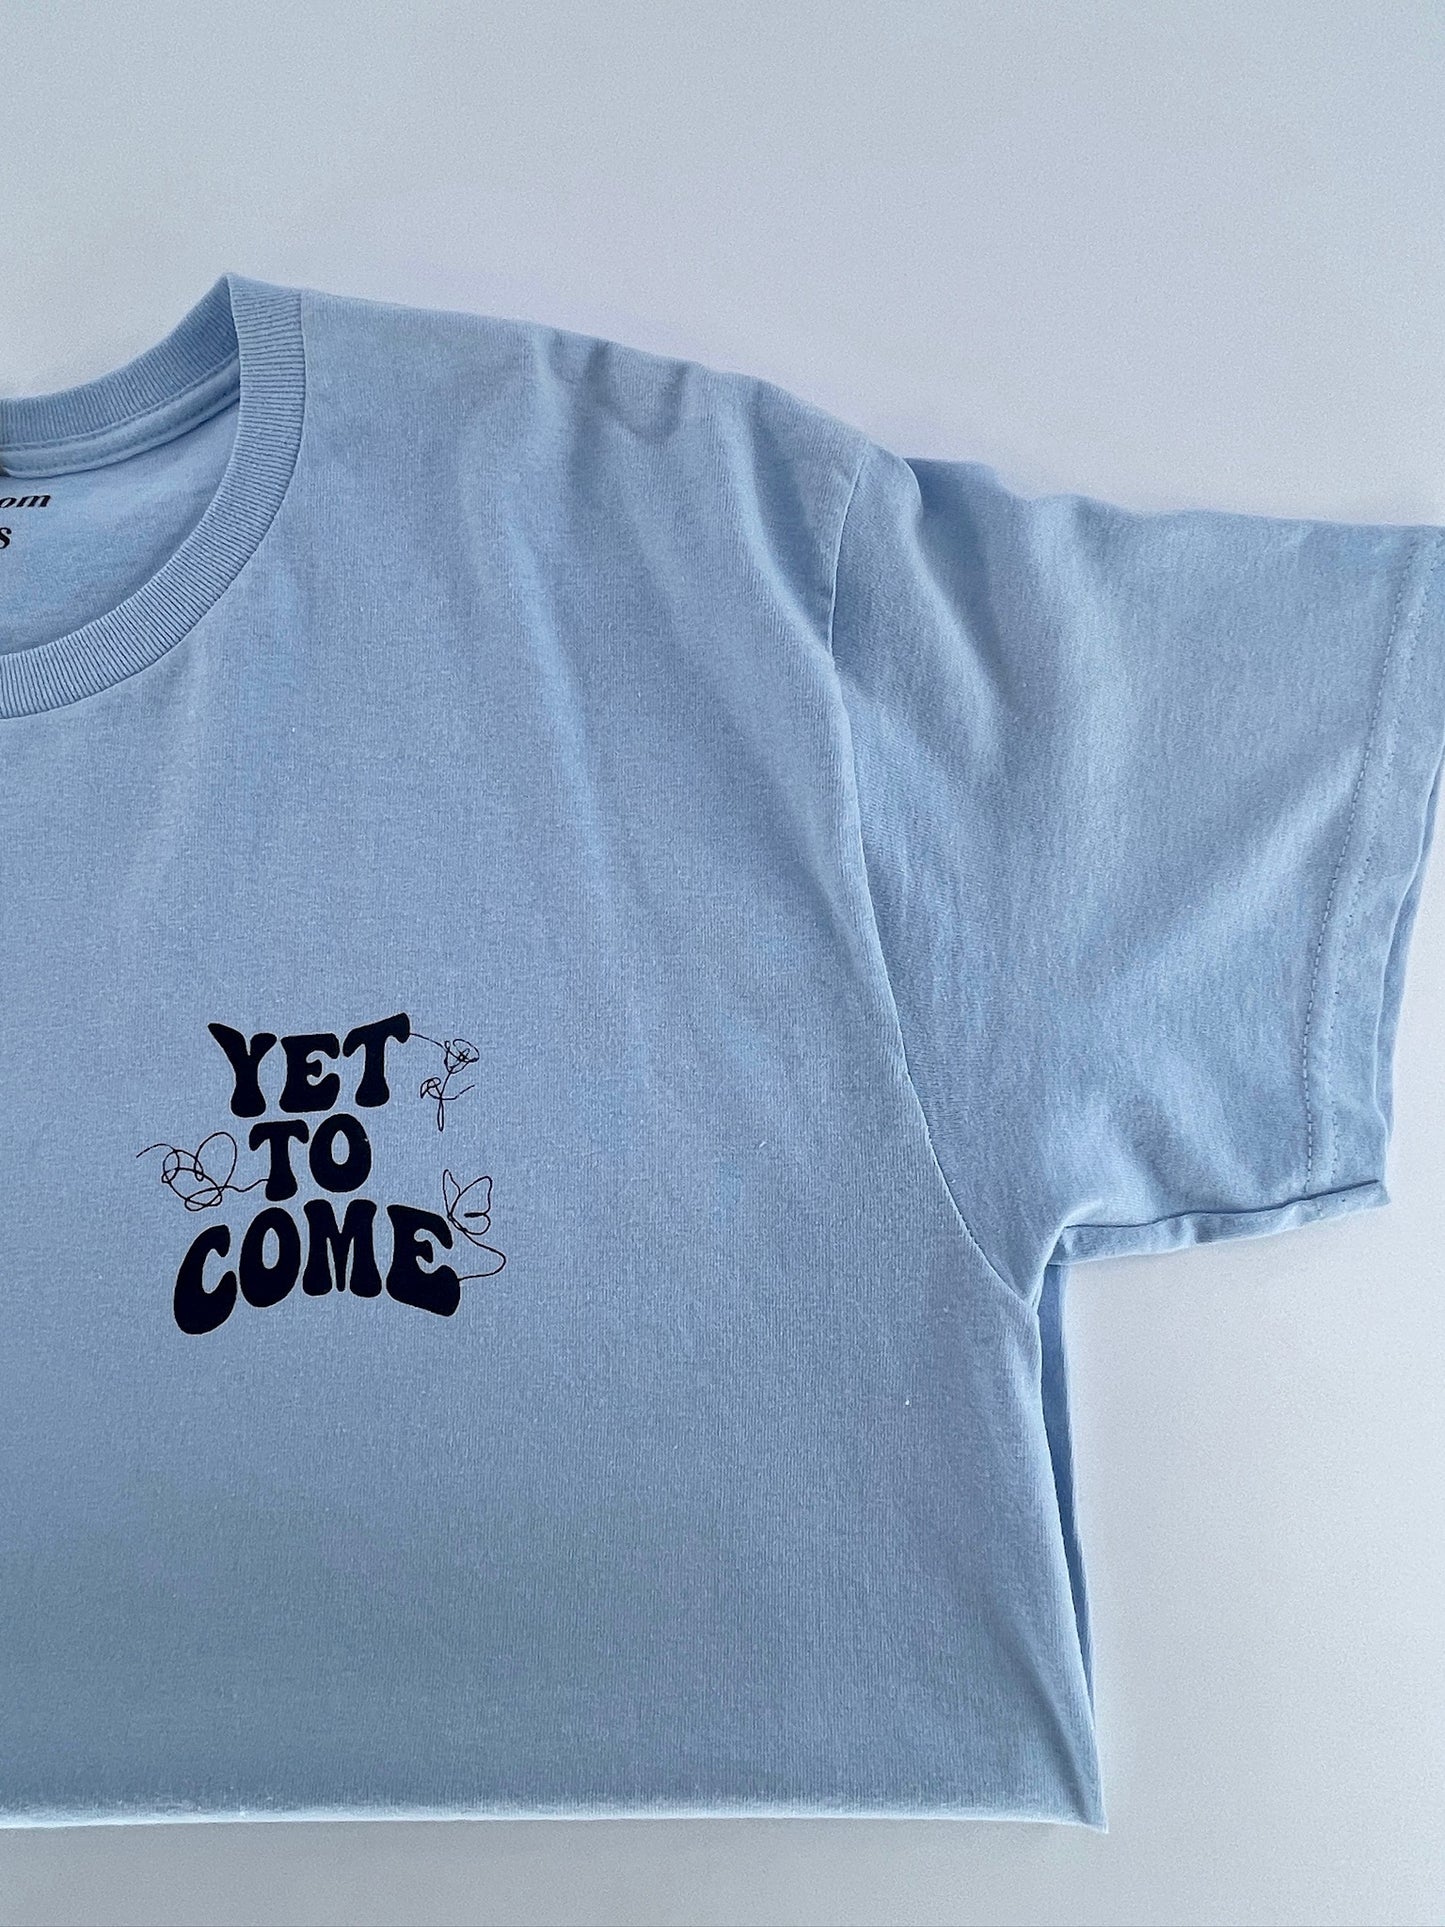 Yet to Come Tee